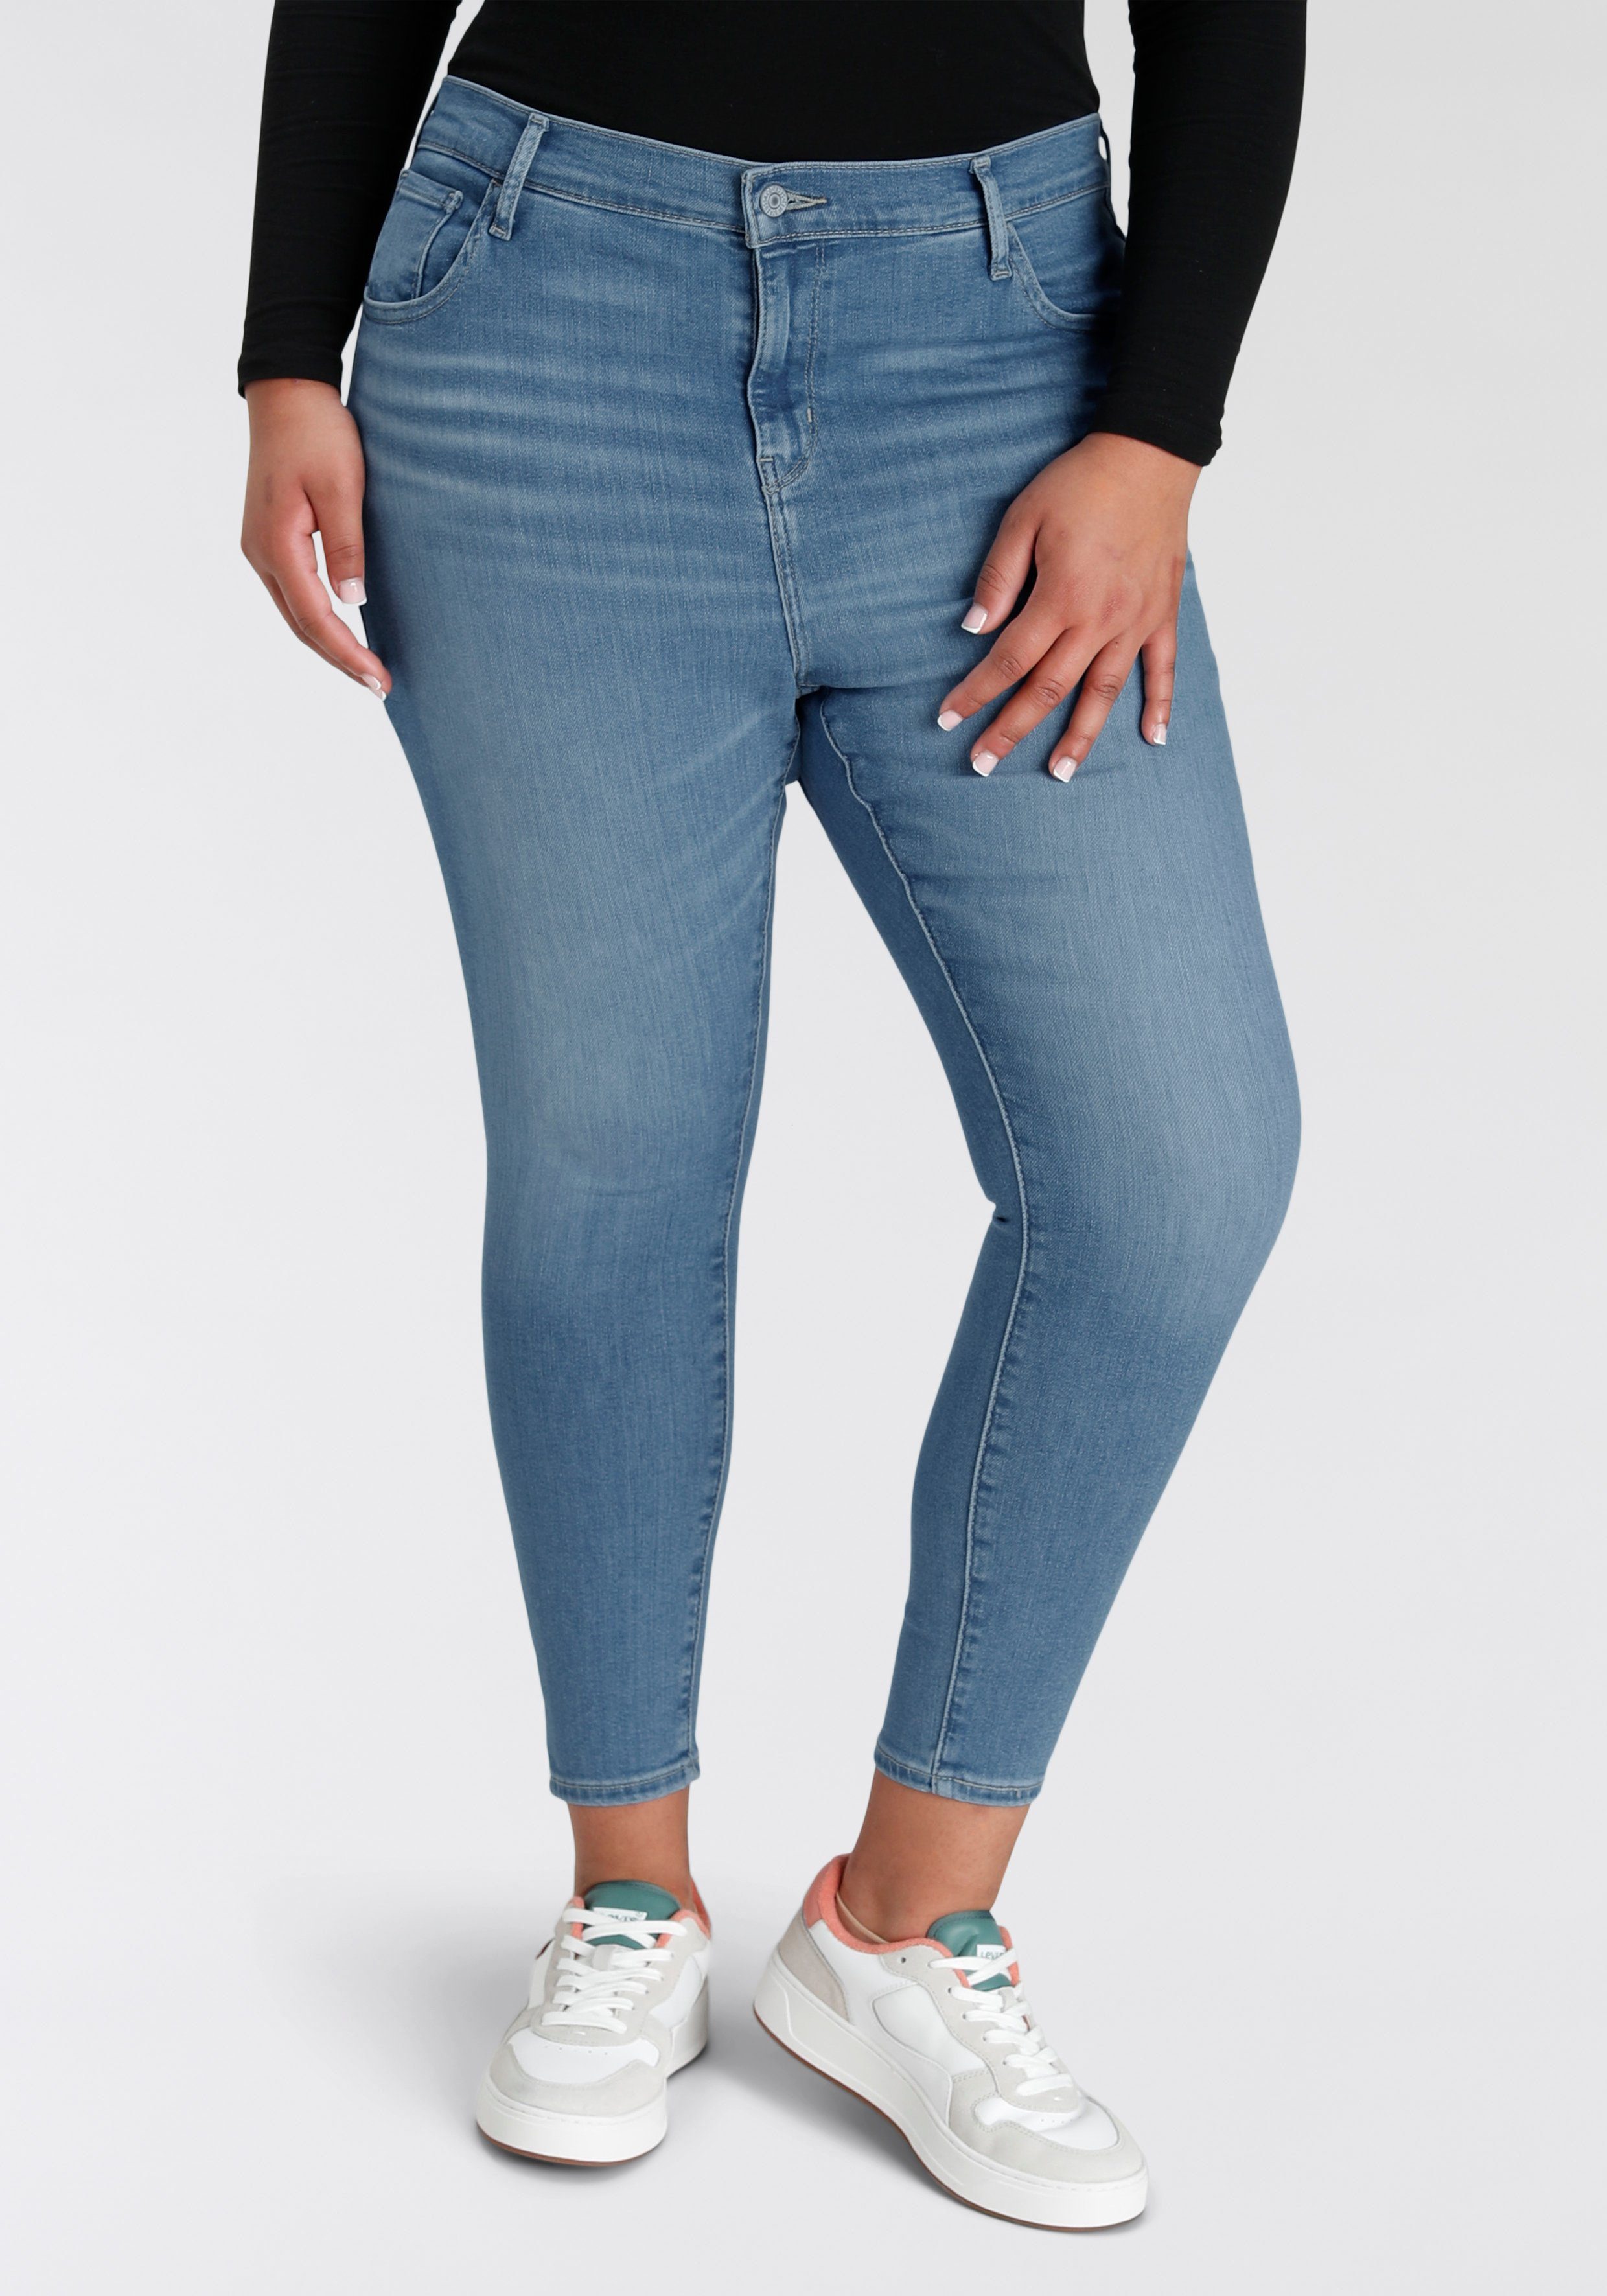 Levi's Plus Skinny fit jeans 720 High-Rise met hoge taille